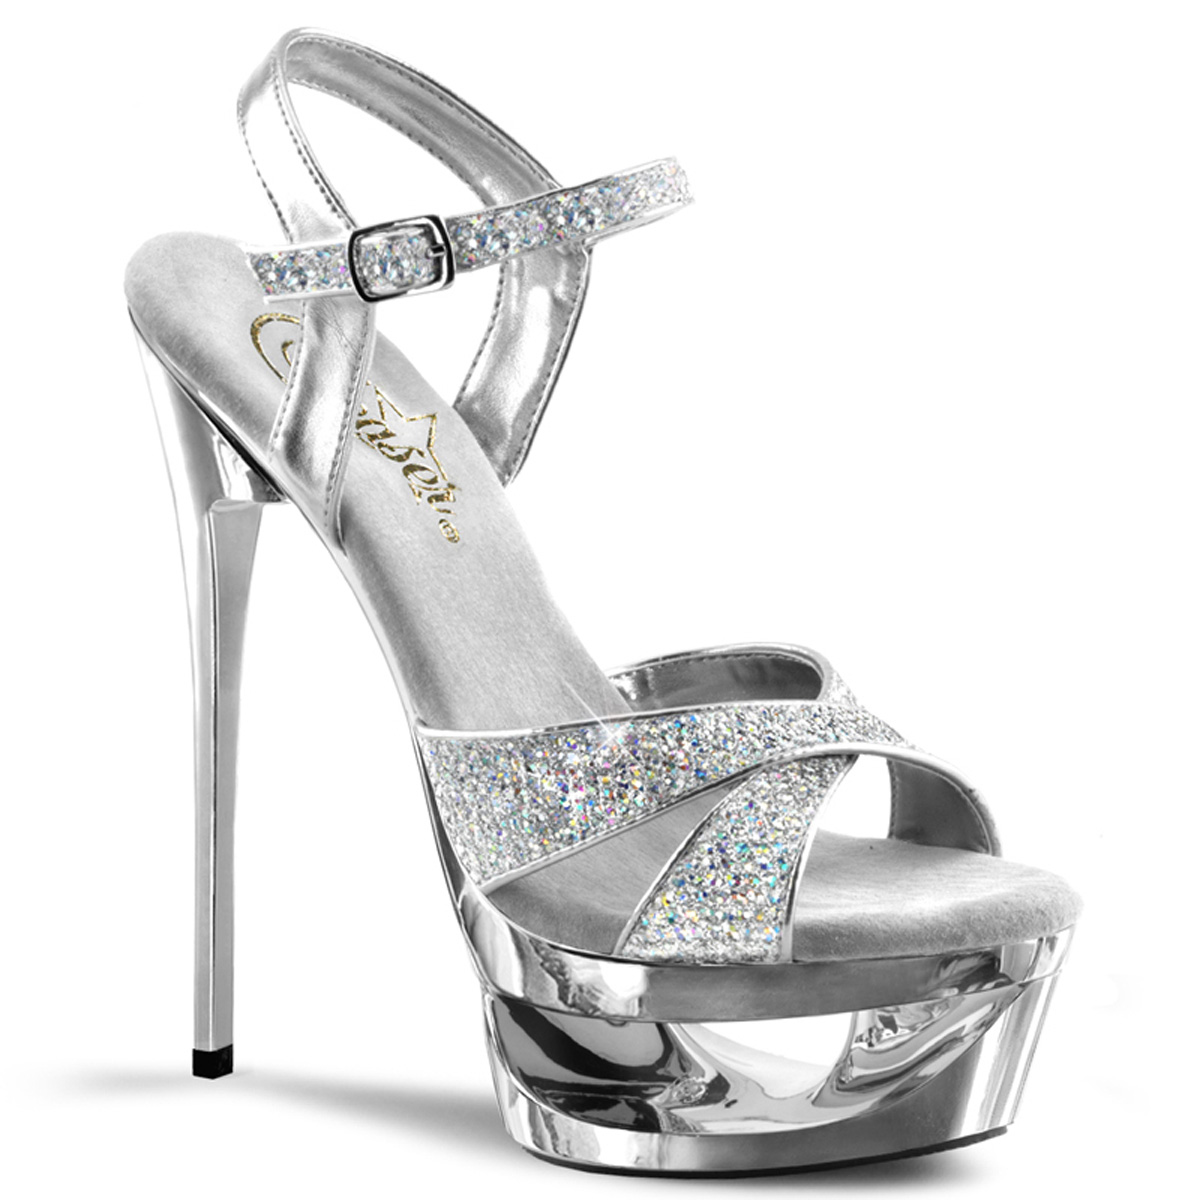 The Rixy Rhinestone Heel In Silver • Impressions Online Boutique